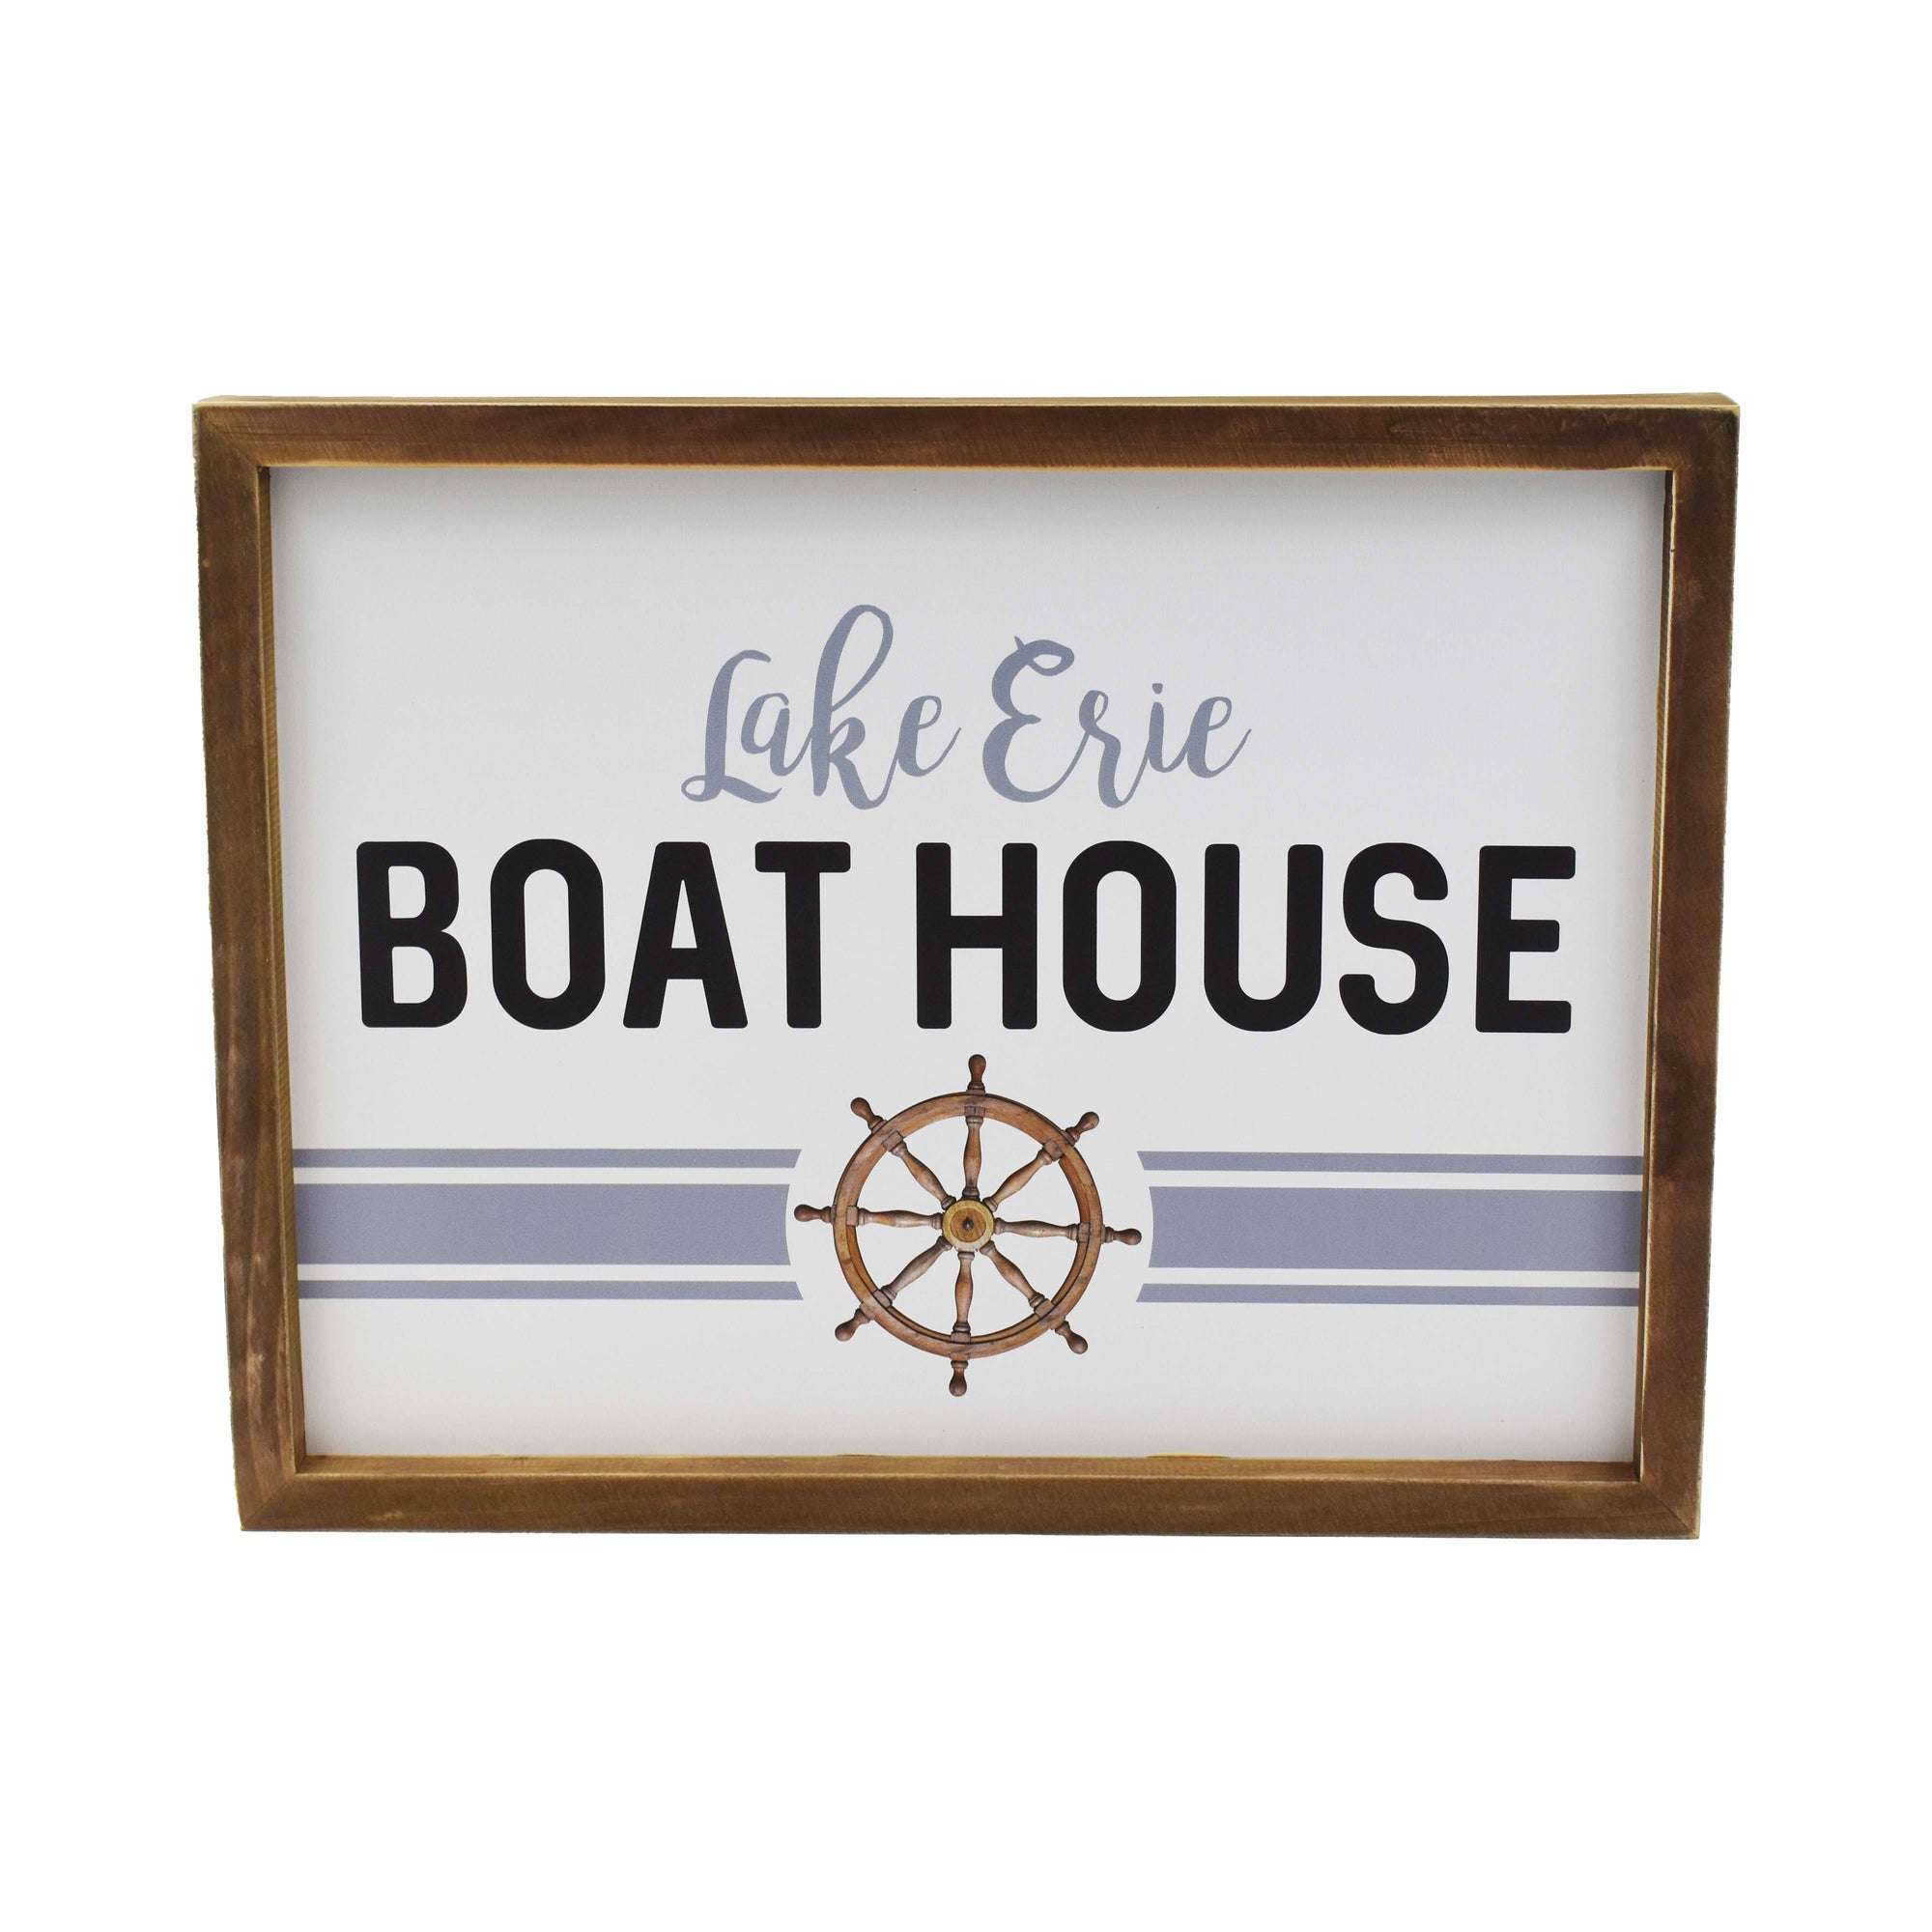 &quot;Lake Erie Boathouse&quot; Framed Wooden Sign